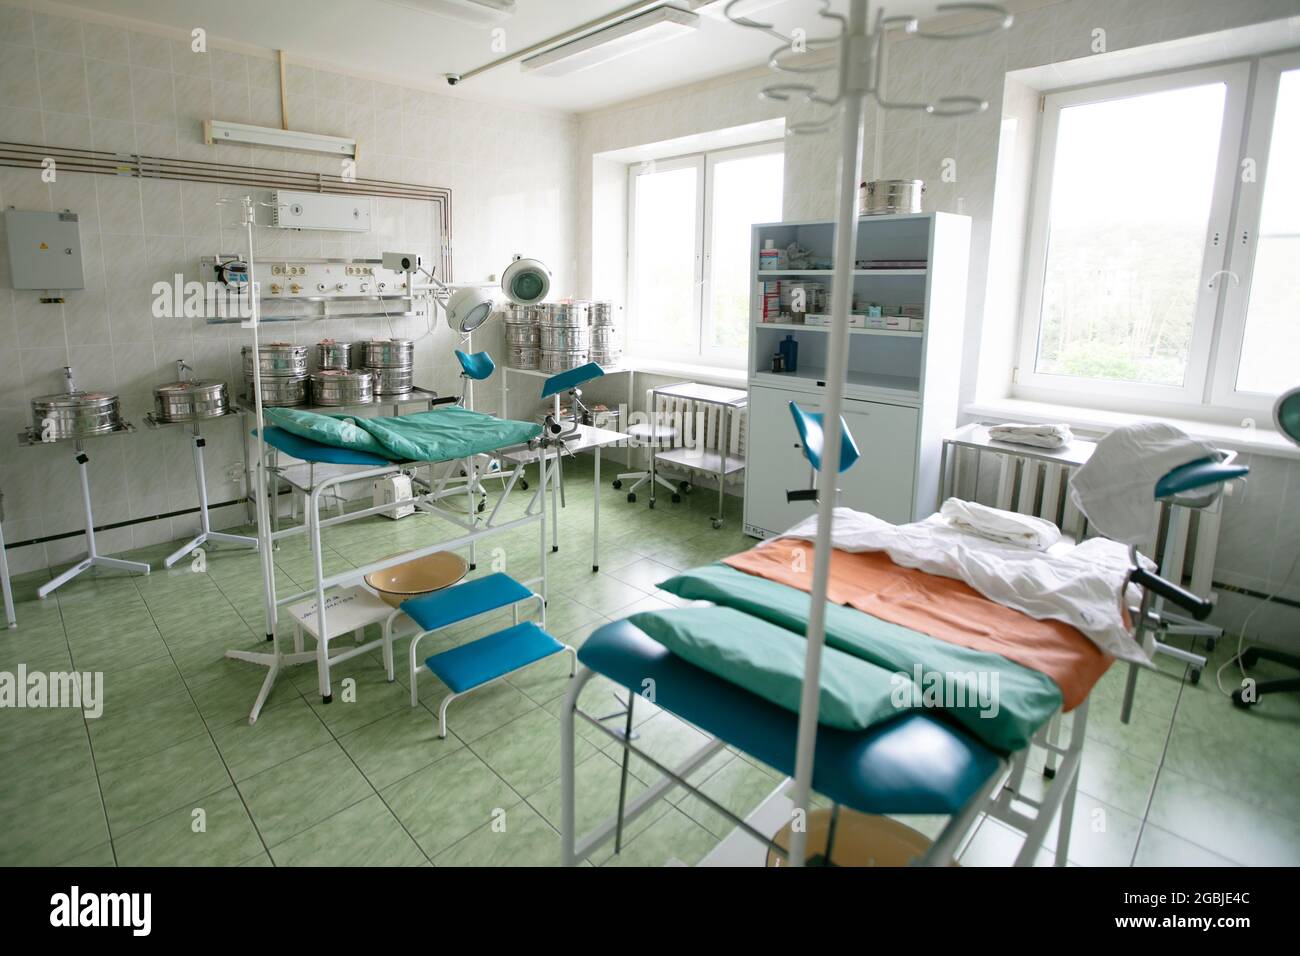 Belarus, the city of Gomil, May 31, 2021. City Hospital. The empty ward of the maternity hospital. Stock Photo